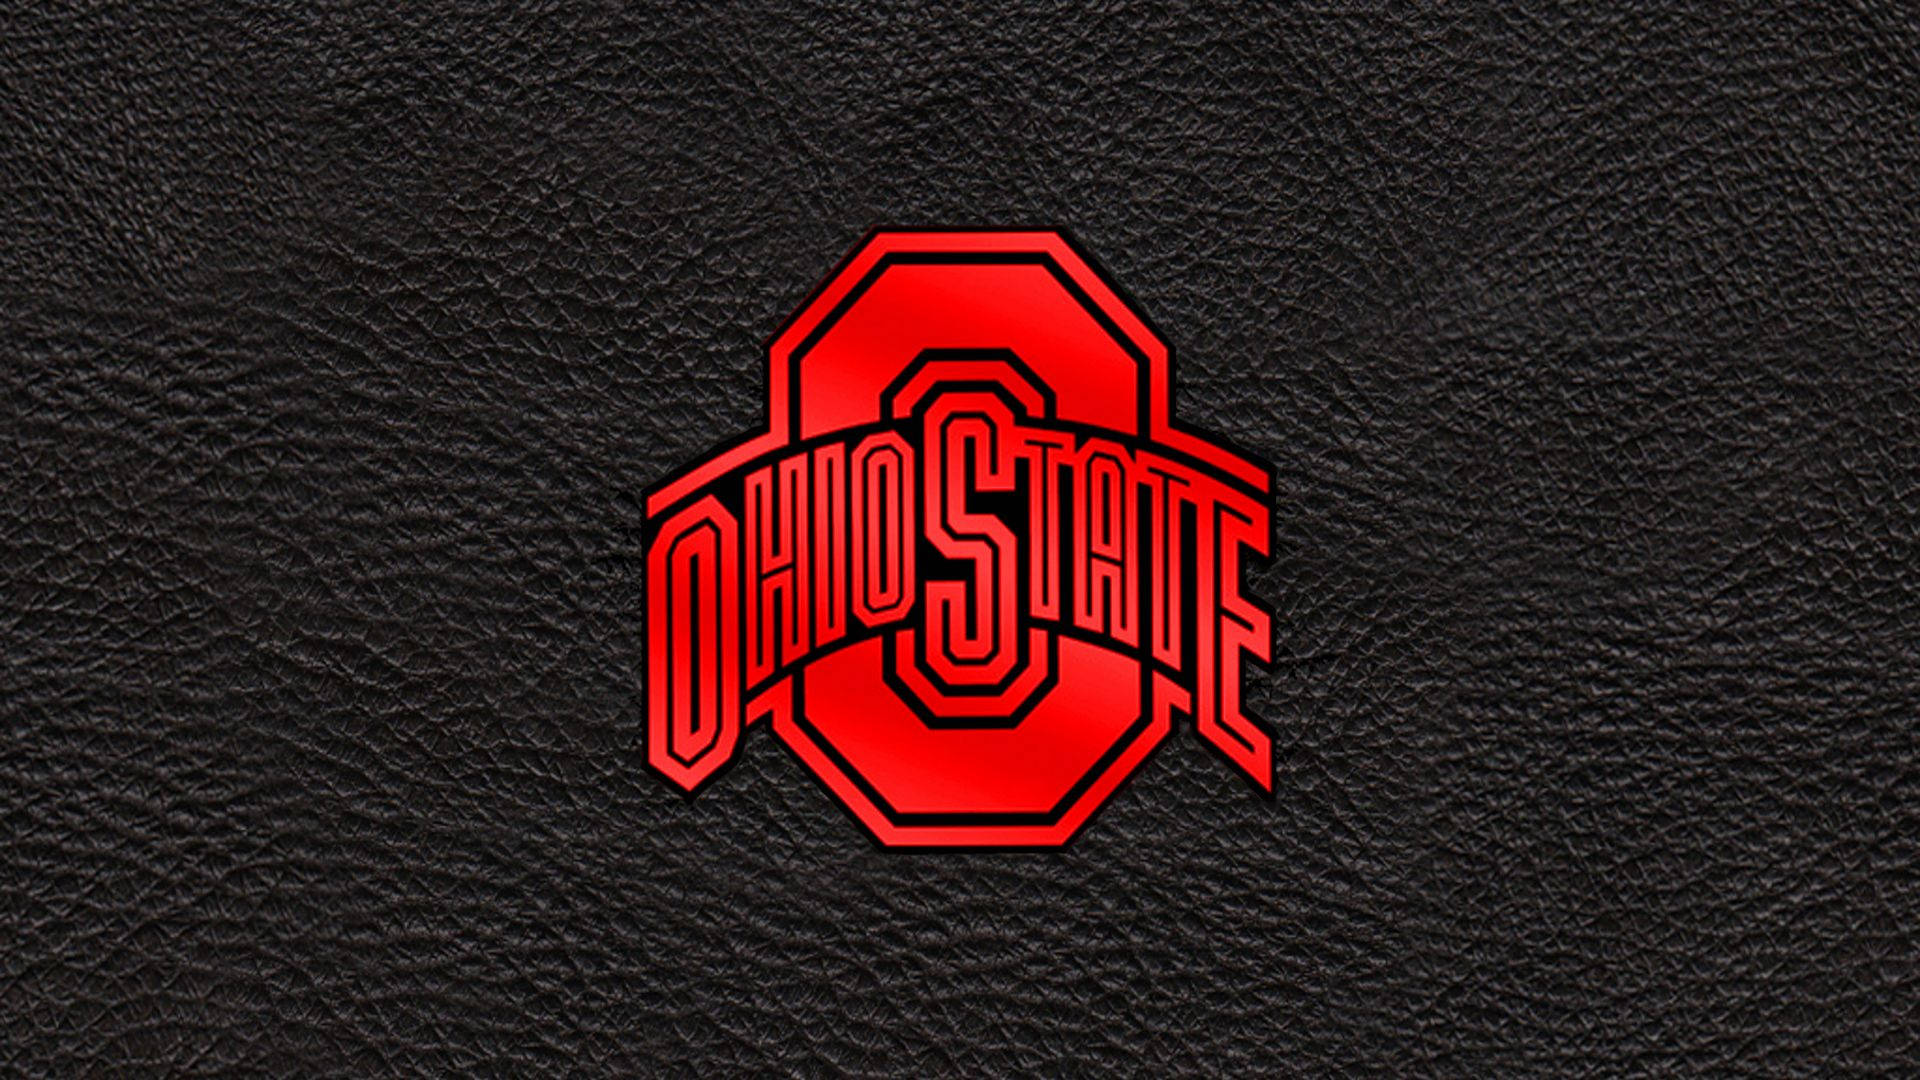 Ohio State Buckeyes Football Game Logo Picture